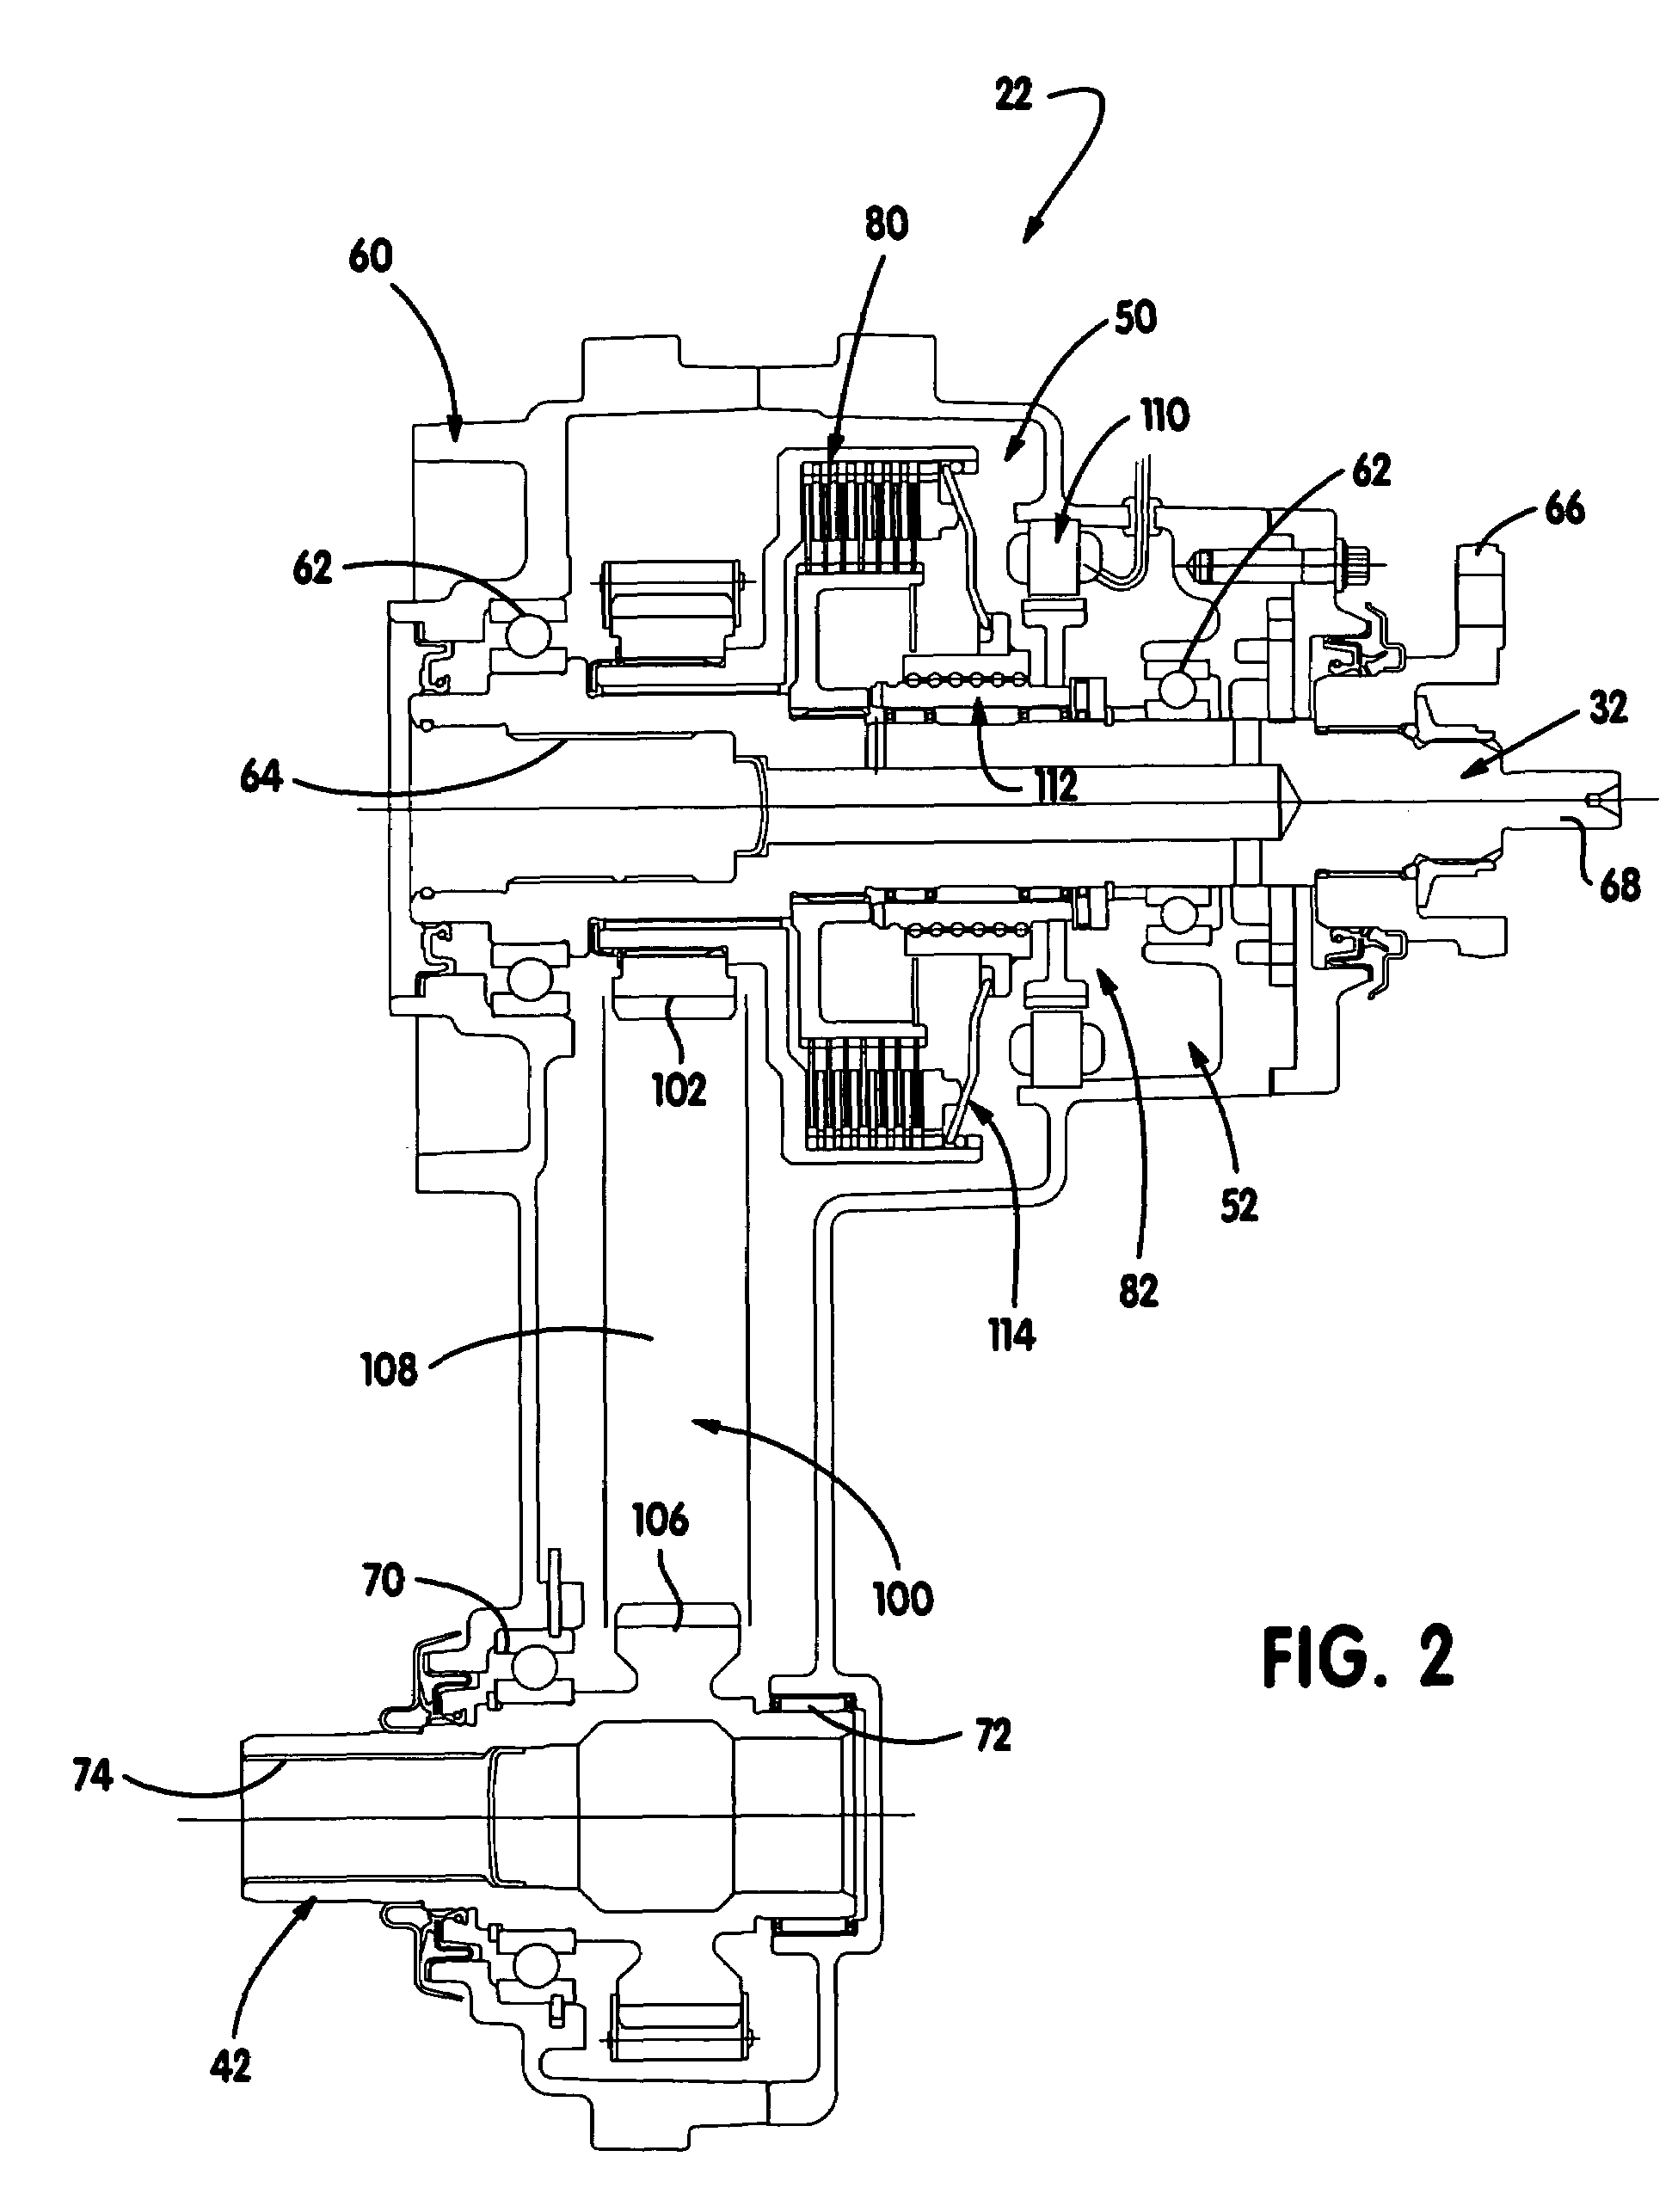 Torque vectoring drive mechanism having a power sharing control system